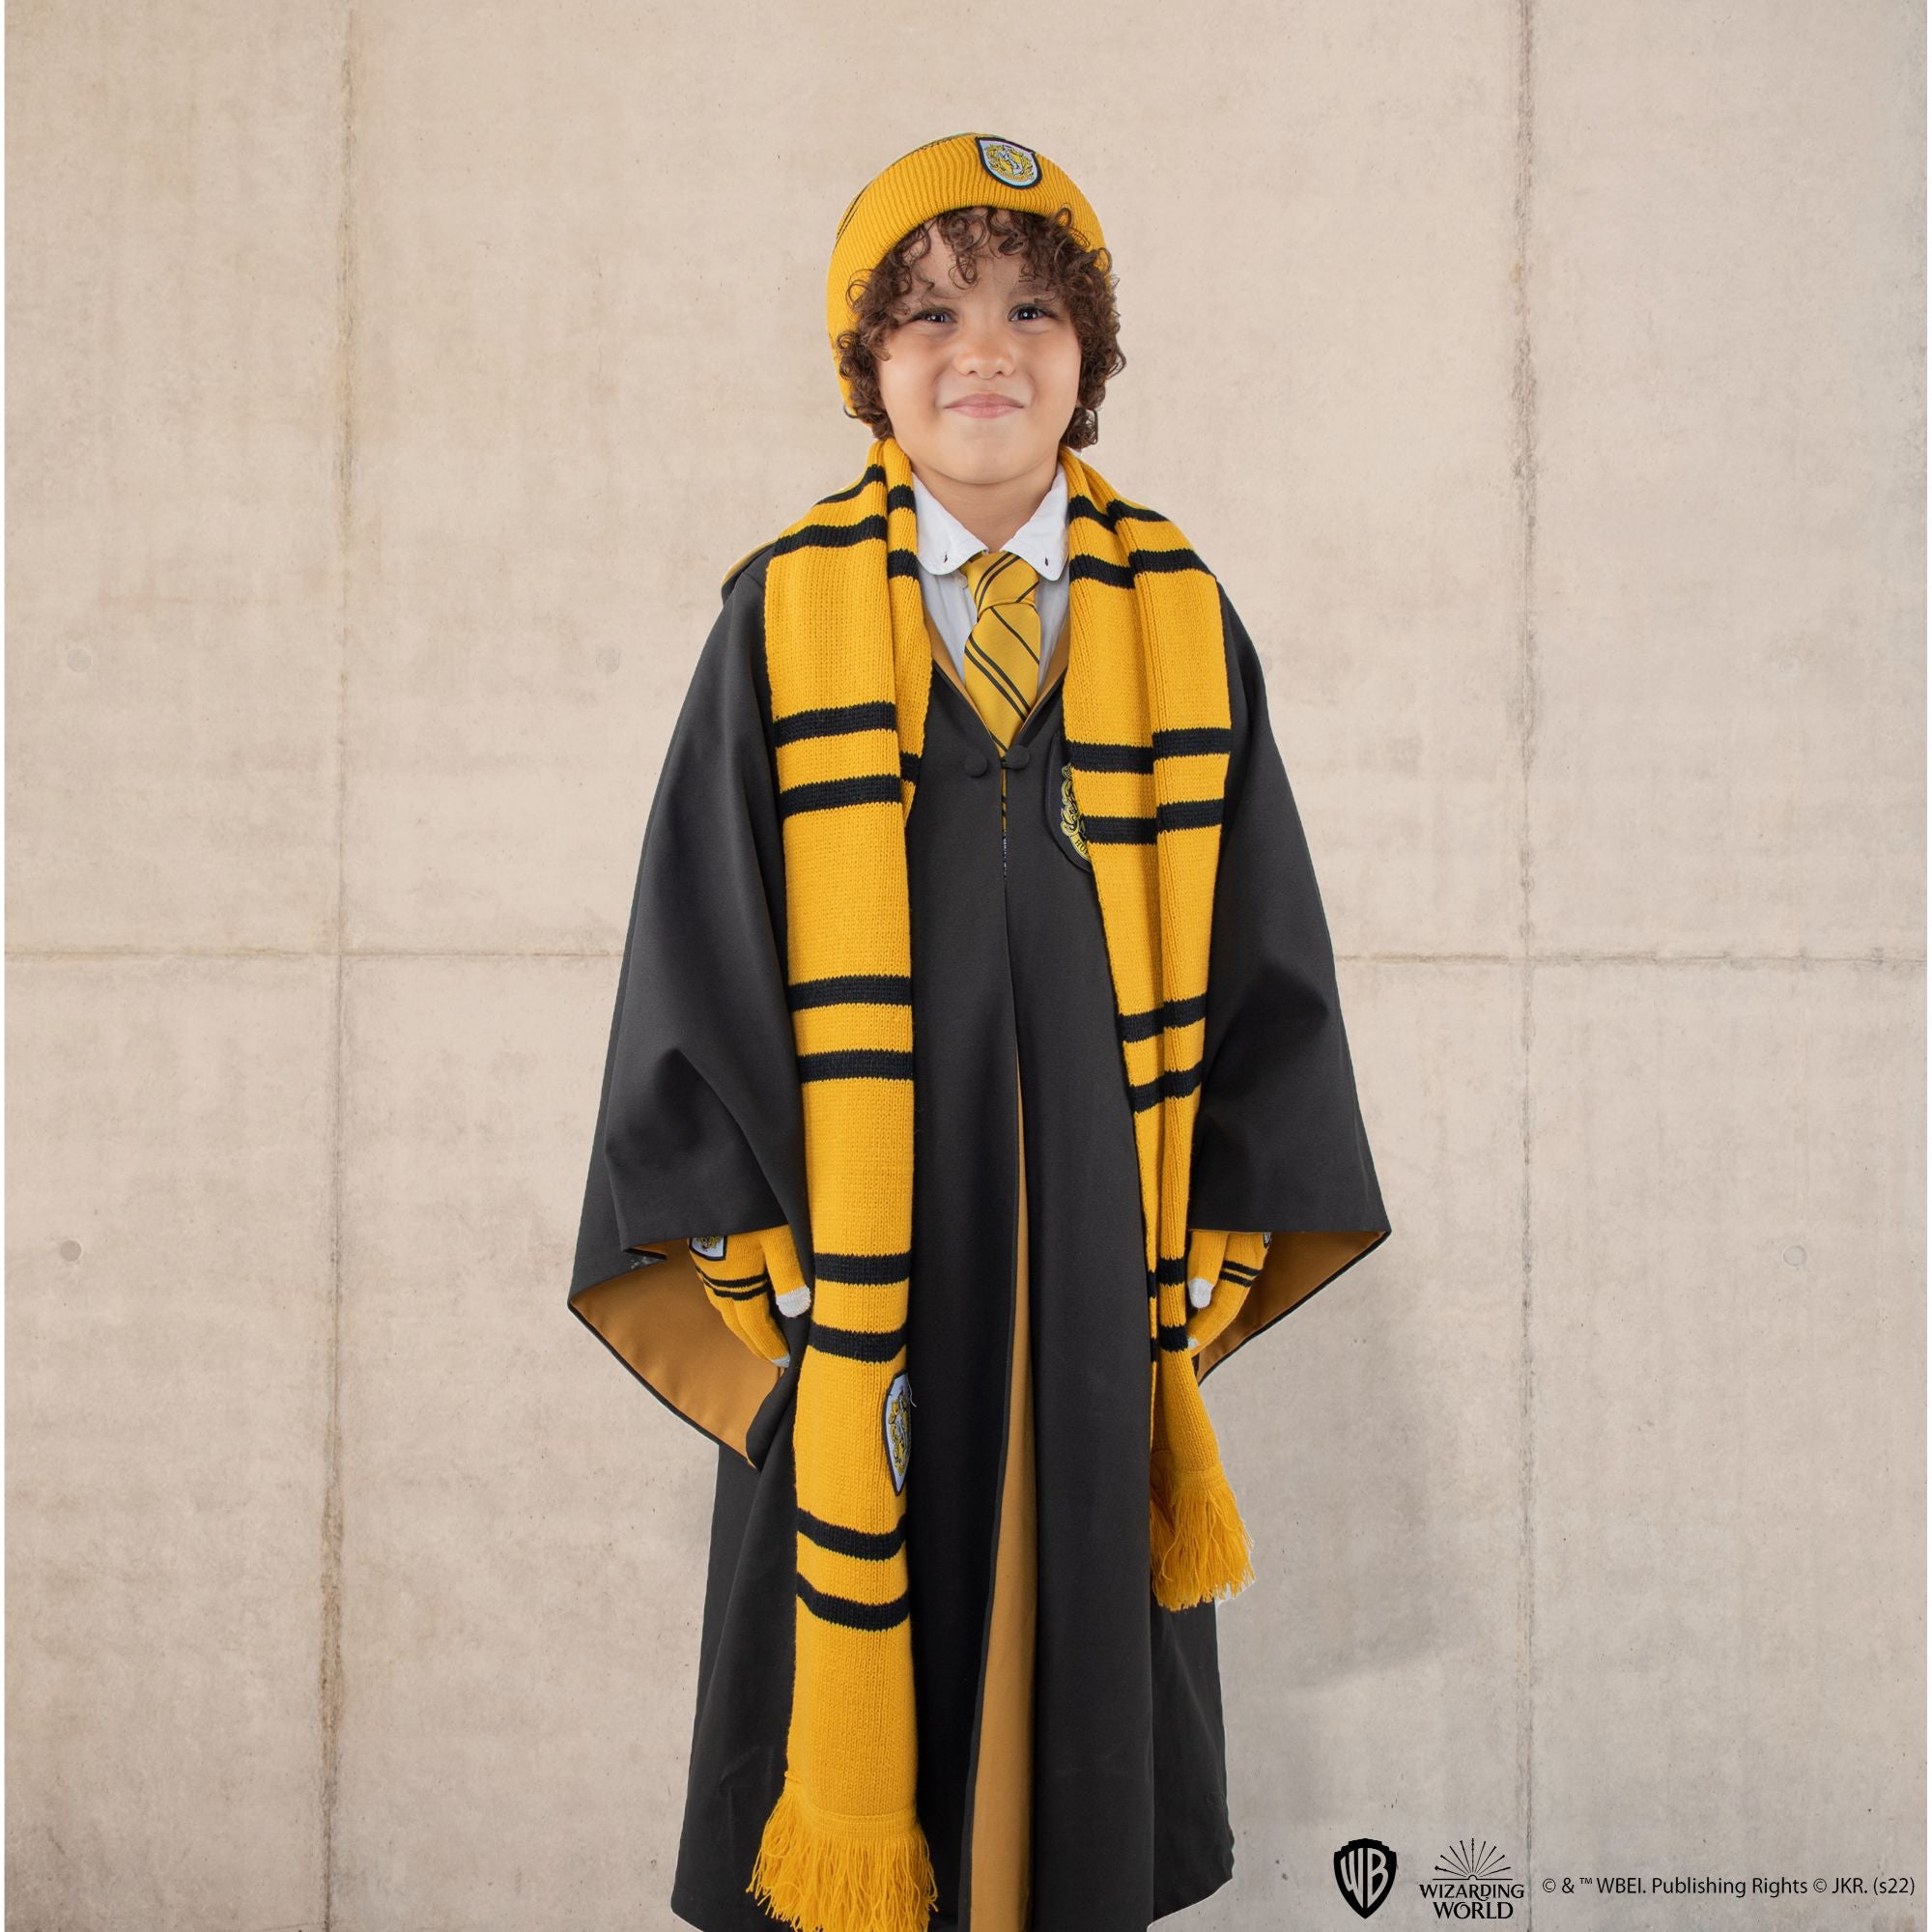 Hufflepuff or Gryffindor? North Texas-Based Kyte Baby Launches New